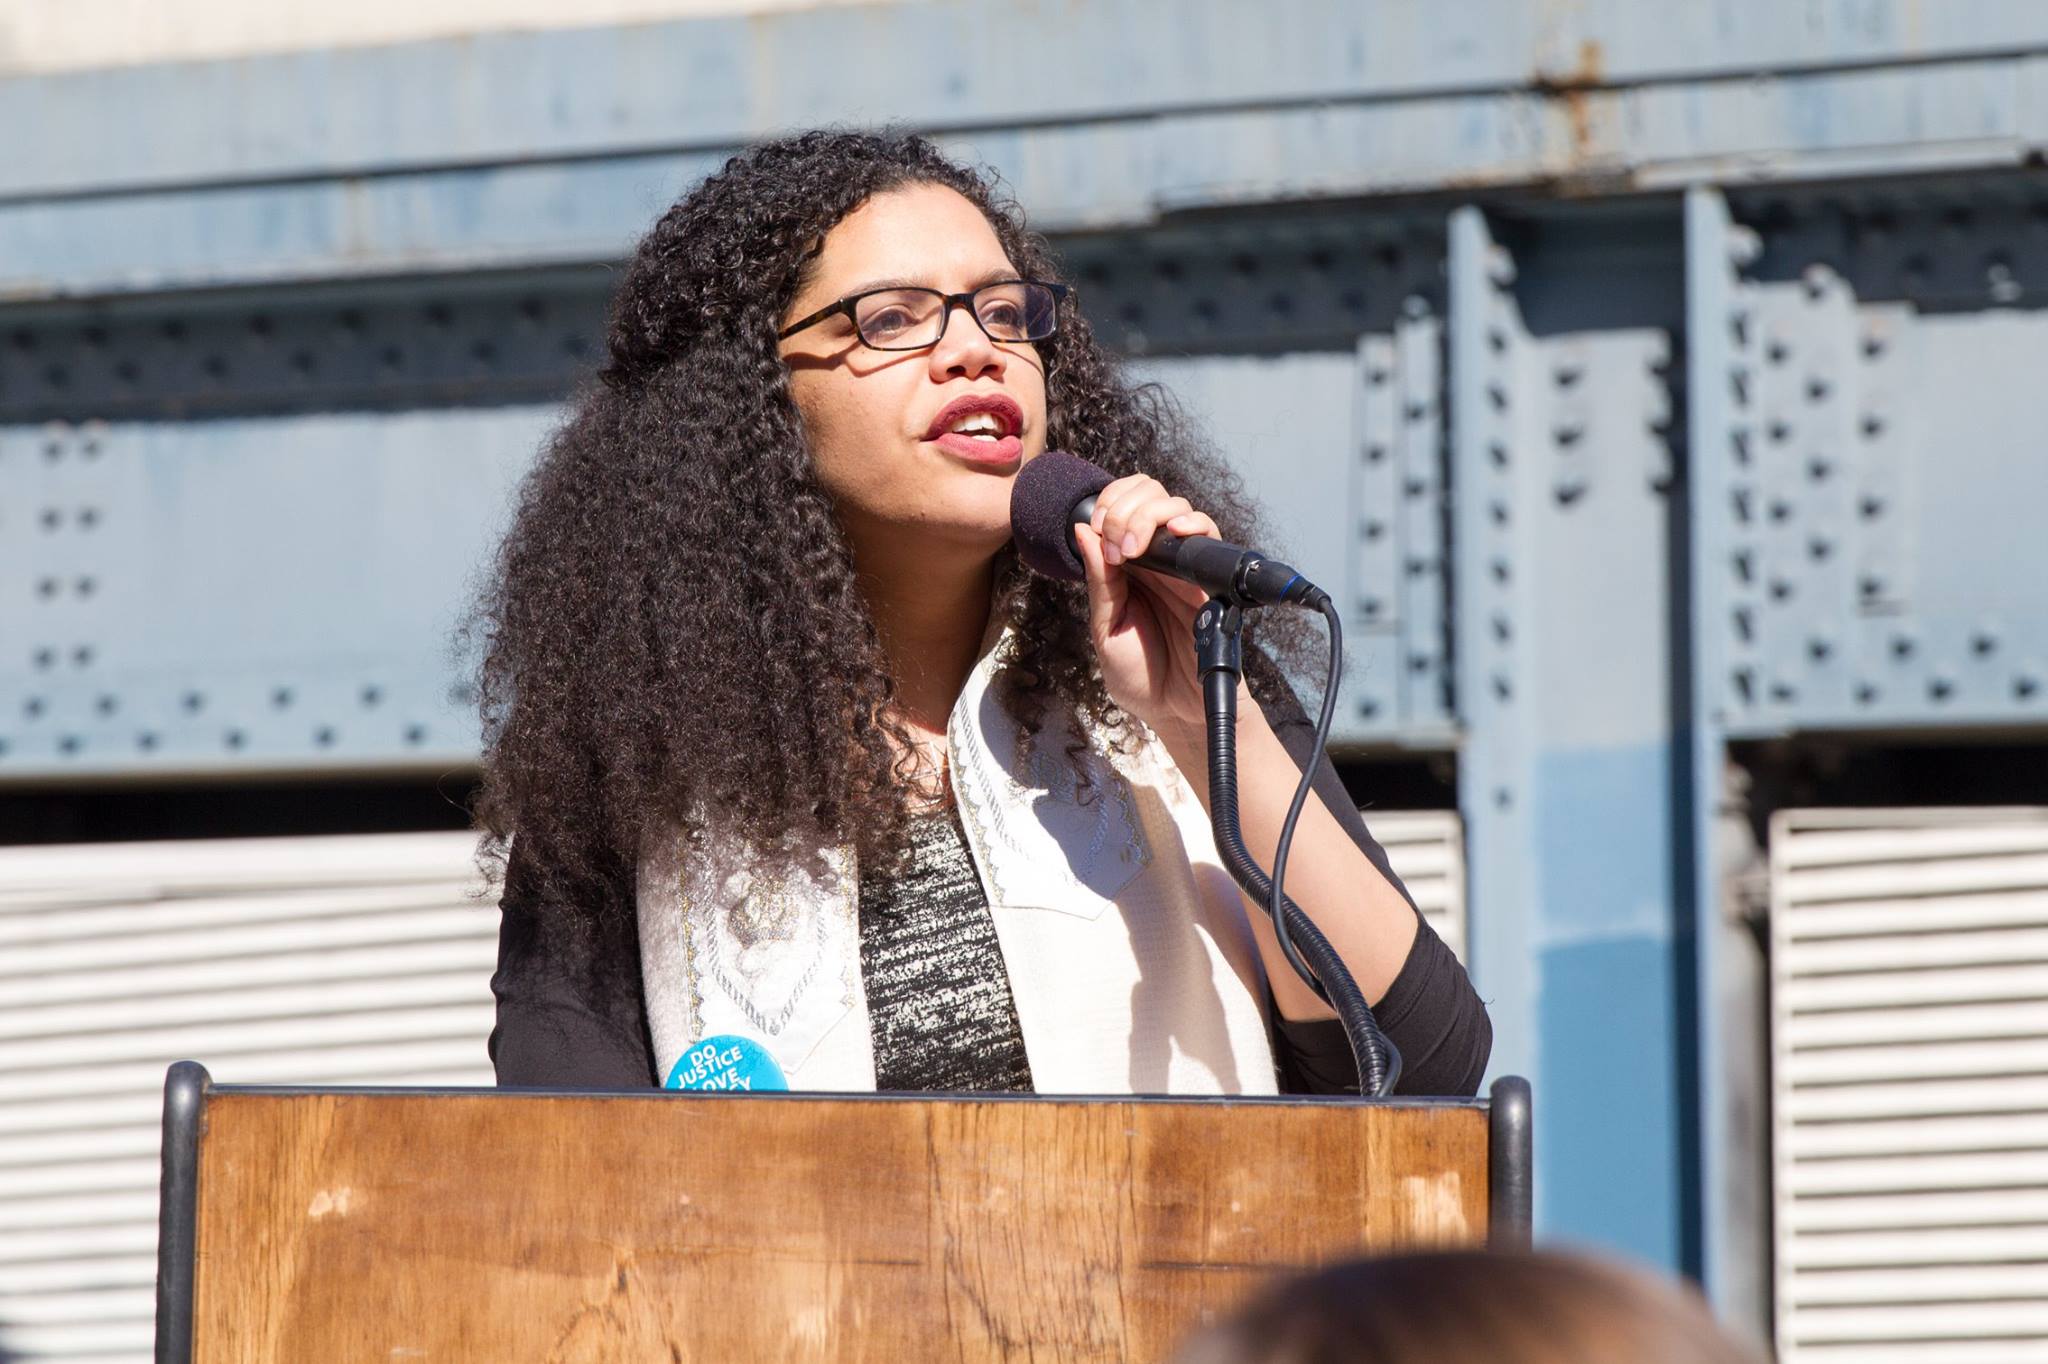 Speaking at the March for Racial Justice - Credit: Mirah Curzer